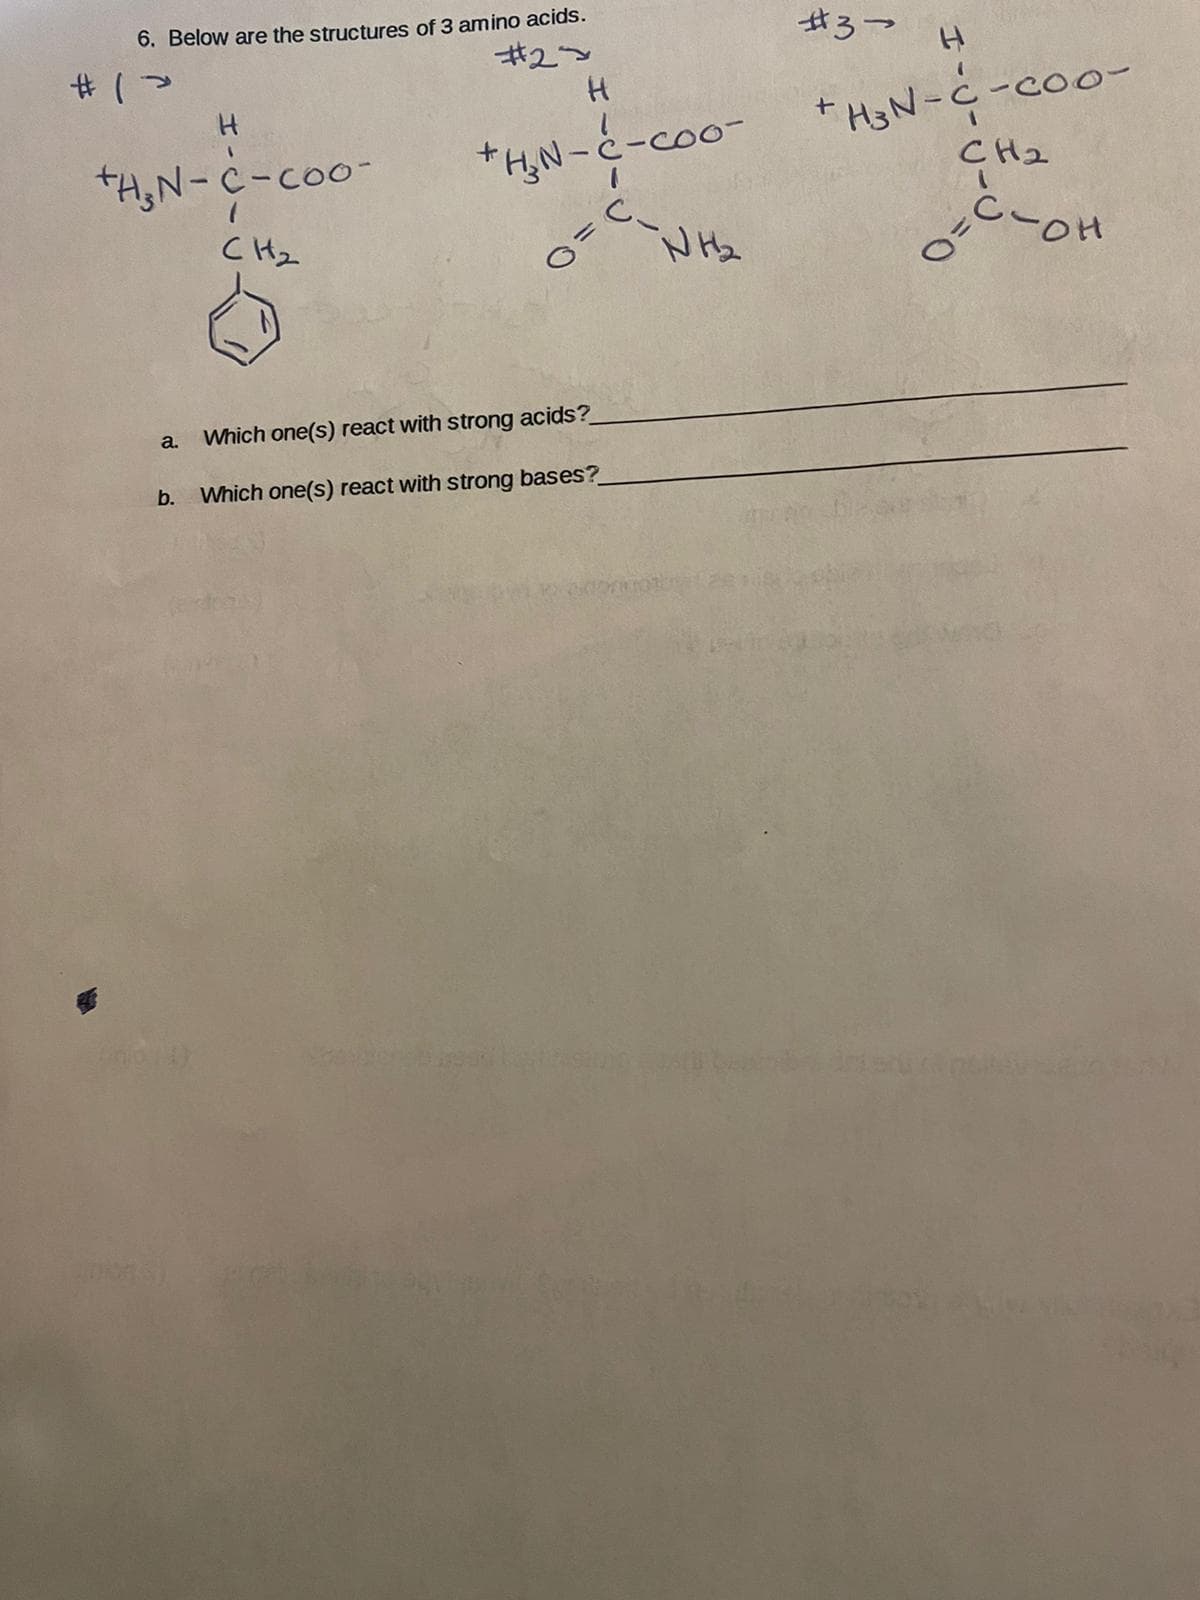 6. Below are the structures of 3 amino acids.
#3-
ギ2~
H3N-C-coo-
CH2
H.
tH,N-c-coo-
*AN-と-ce
C Hz
N Hz
a.
Which one(s) react with strong acids?
b.
Which one(s) react with strong bases?
0.
